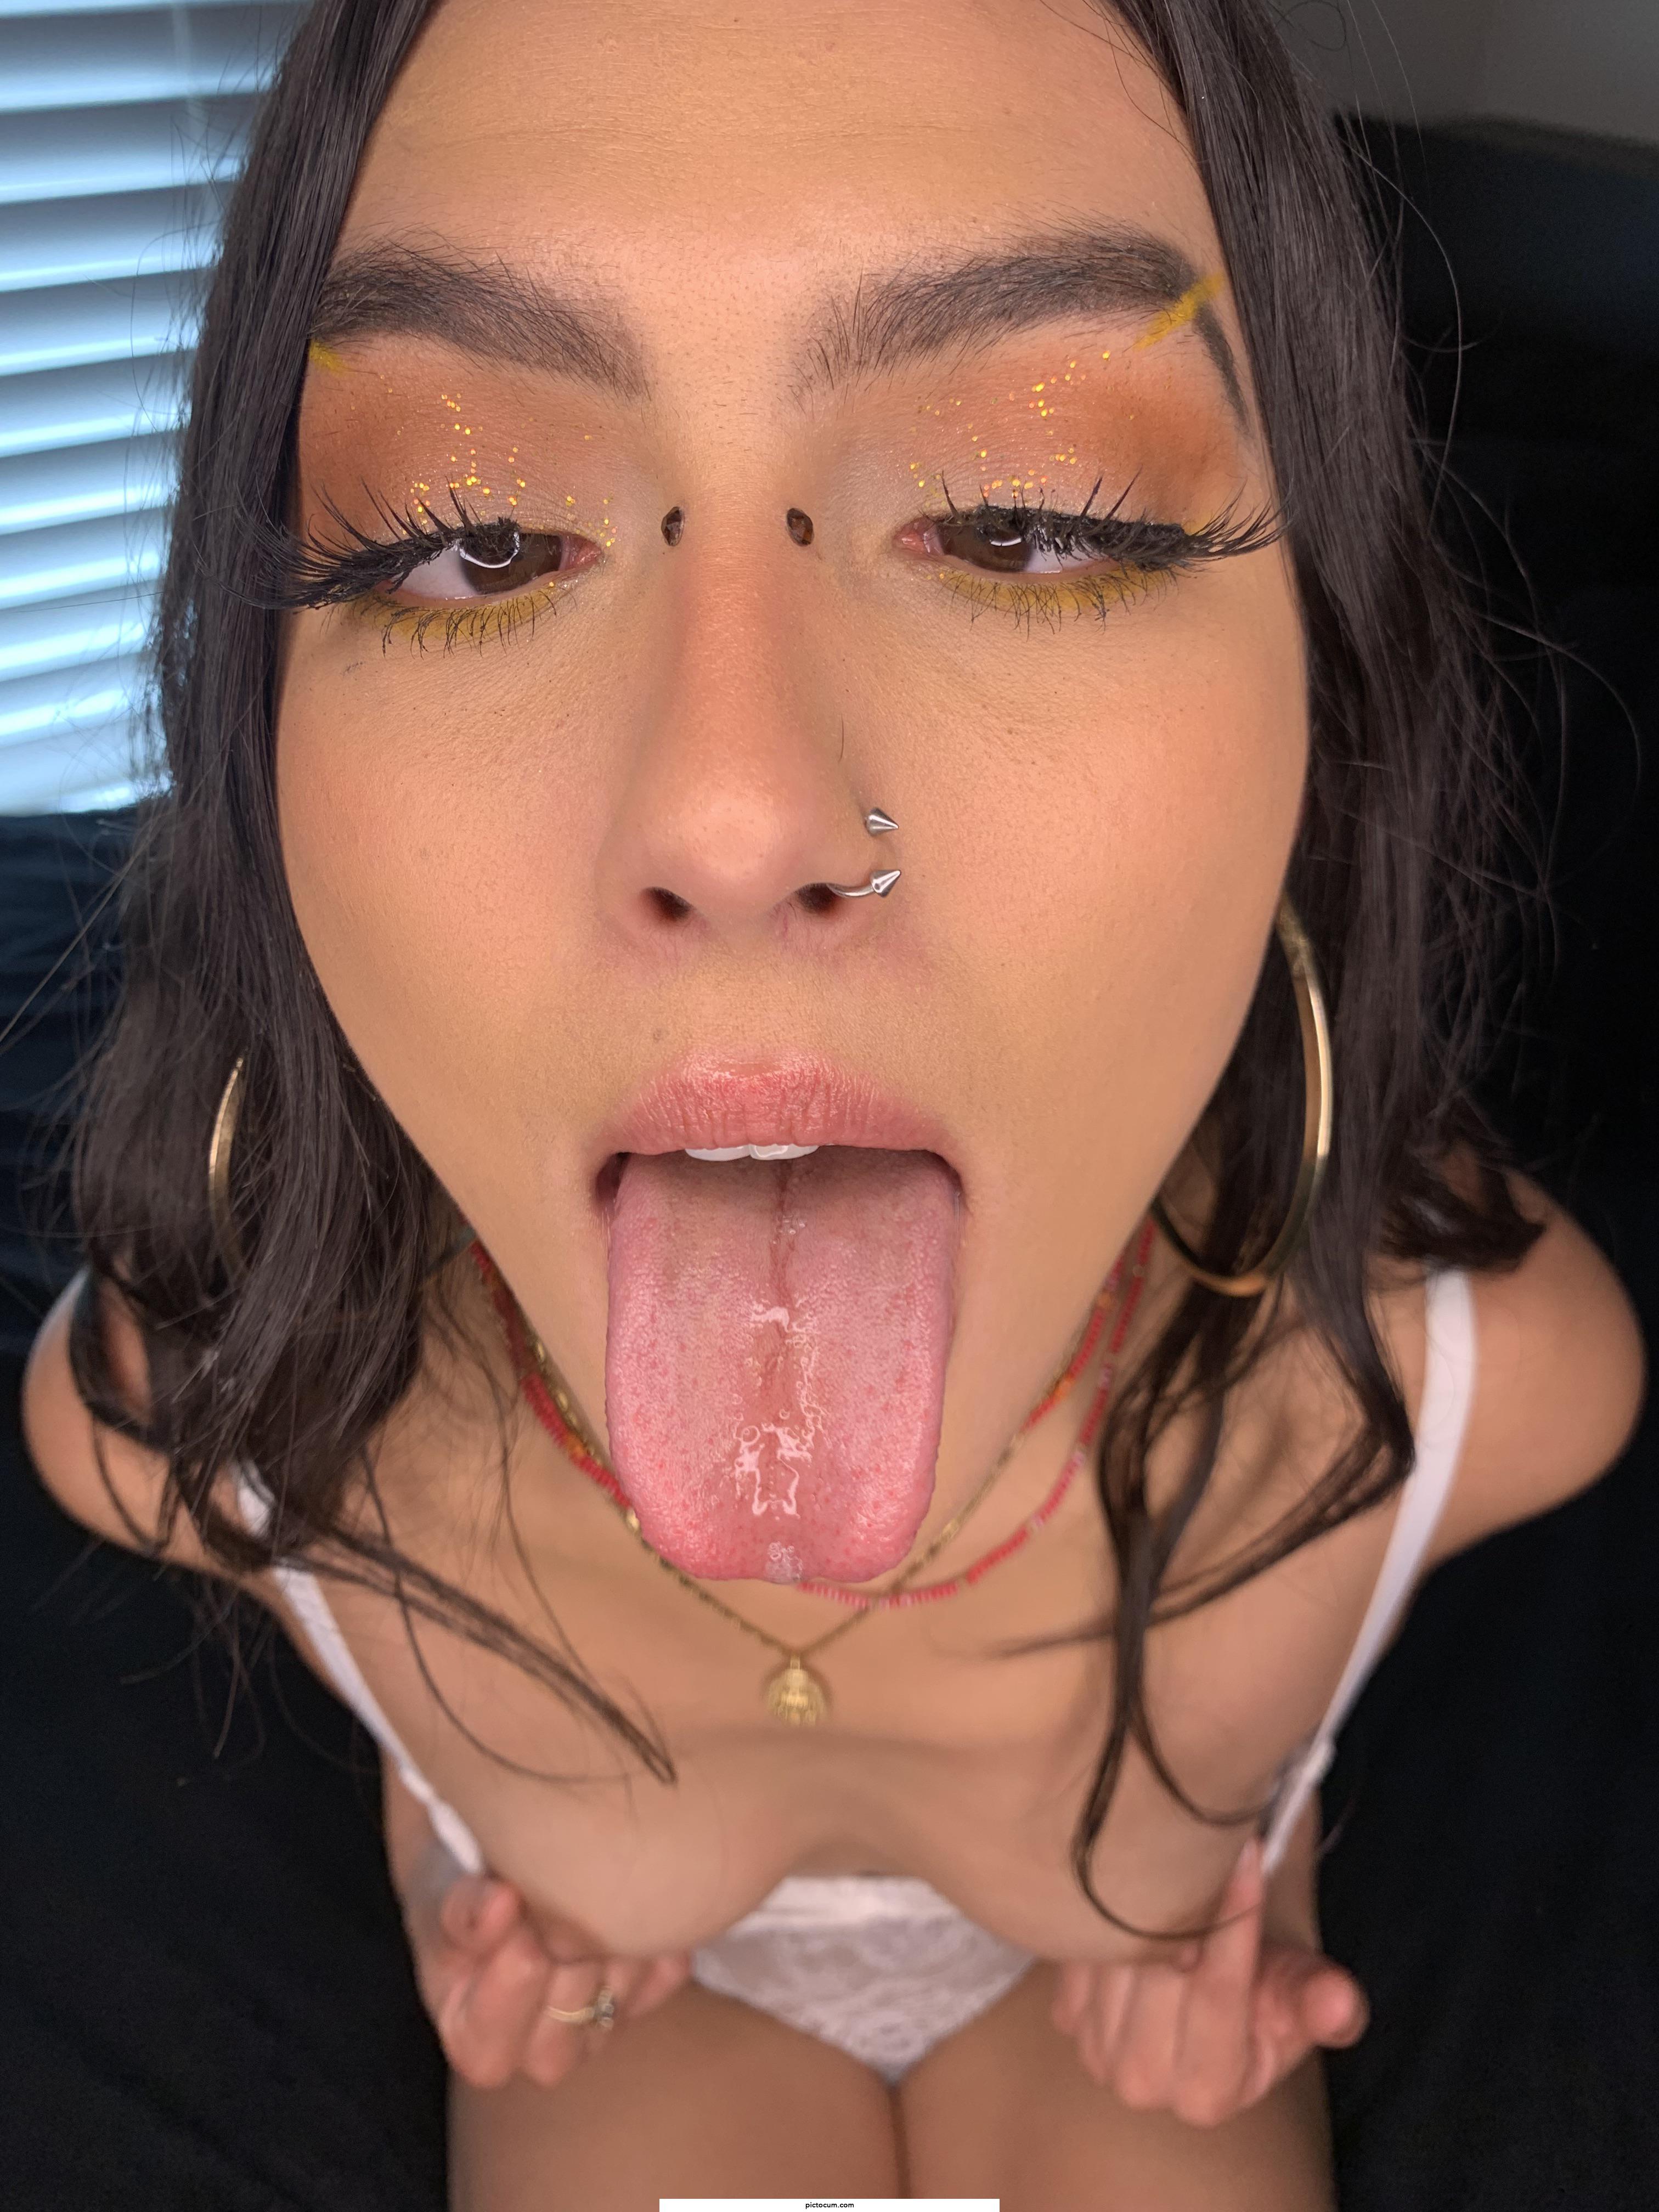 I would love for you to fill my mouth my with your cum 🤤